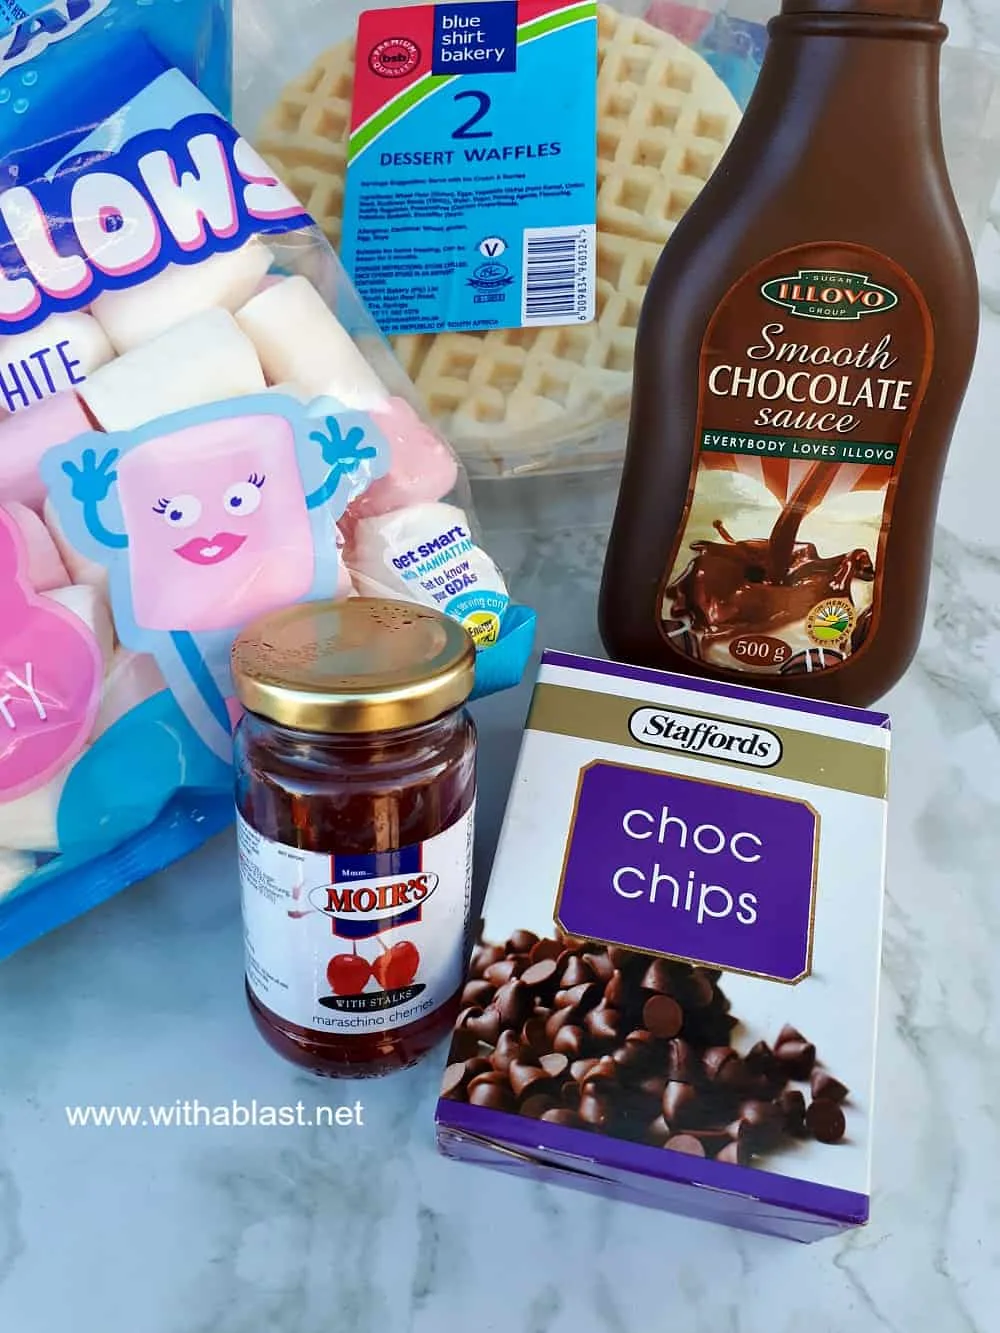 Waffle S'mores For Dessert - Ingredients